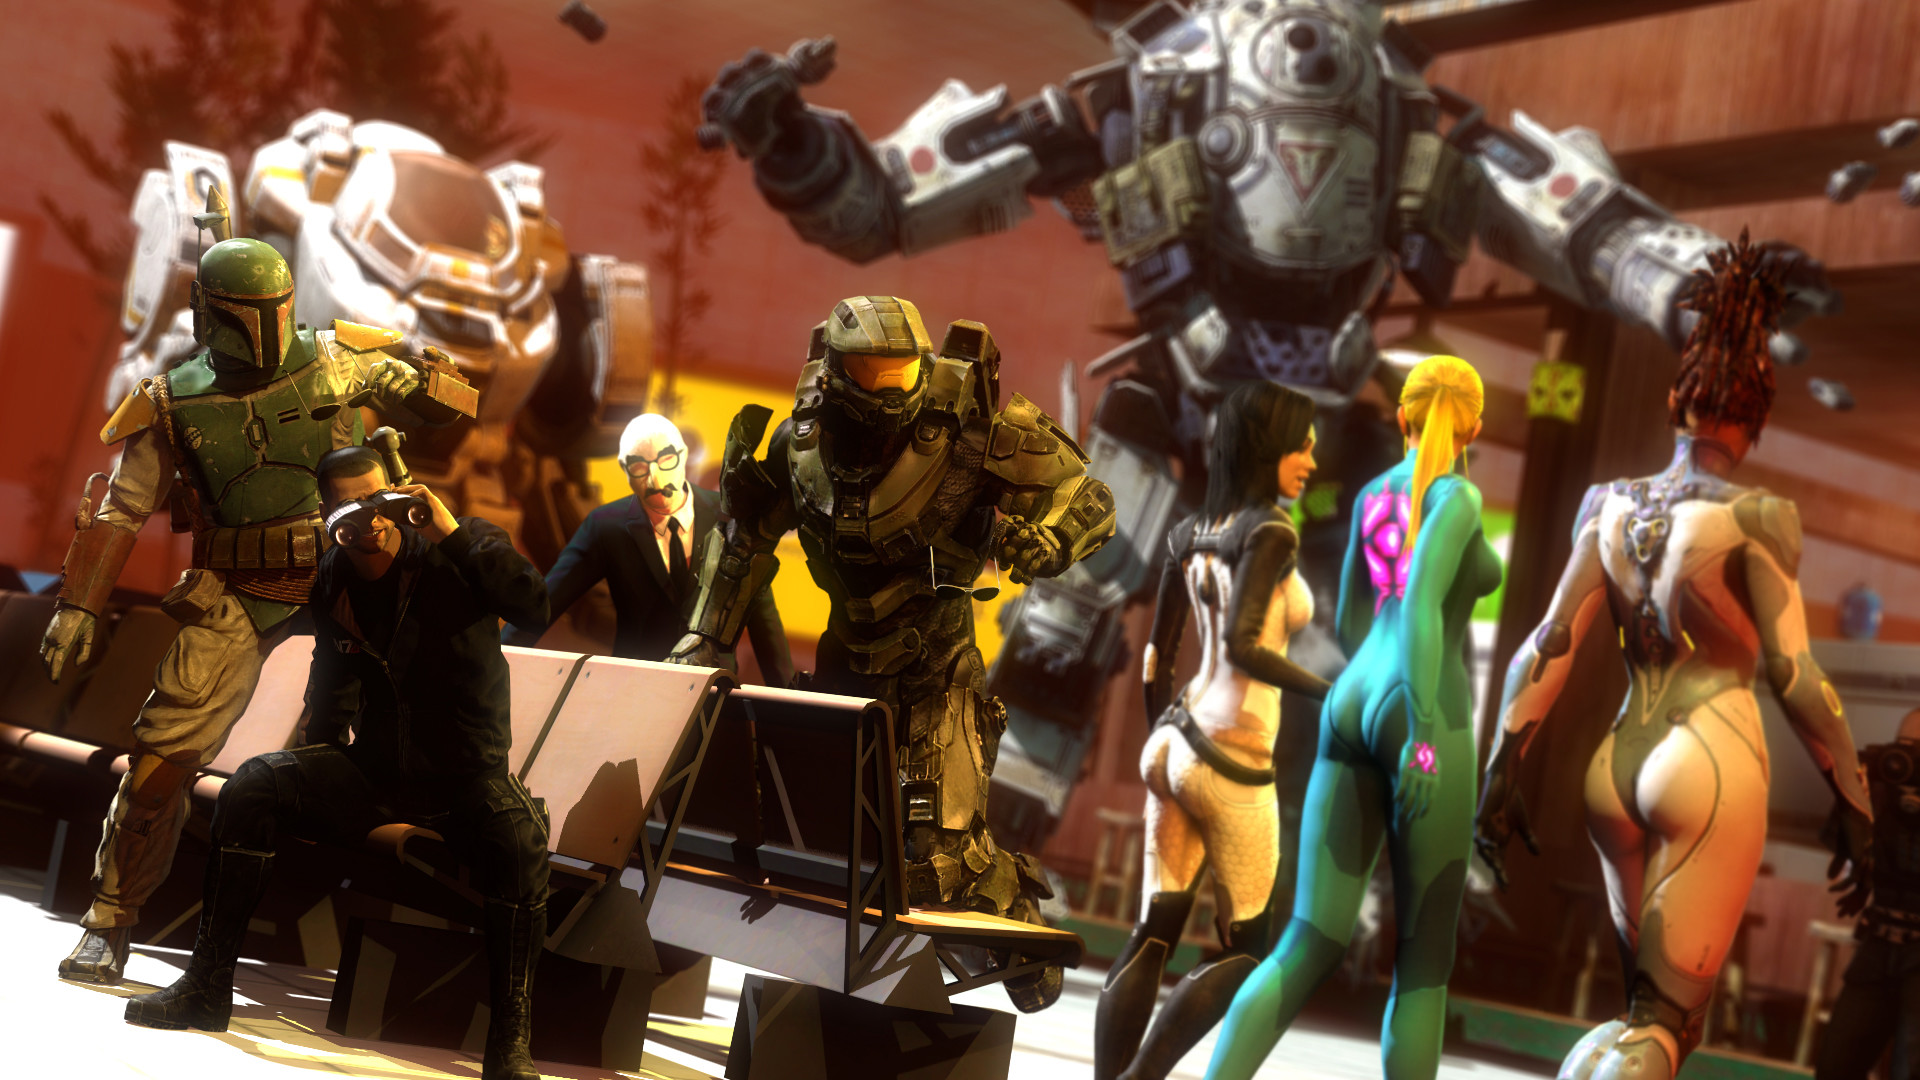 1920x1080 Its Garry's Mod combined with photoshop. Source: You need to login to ...